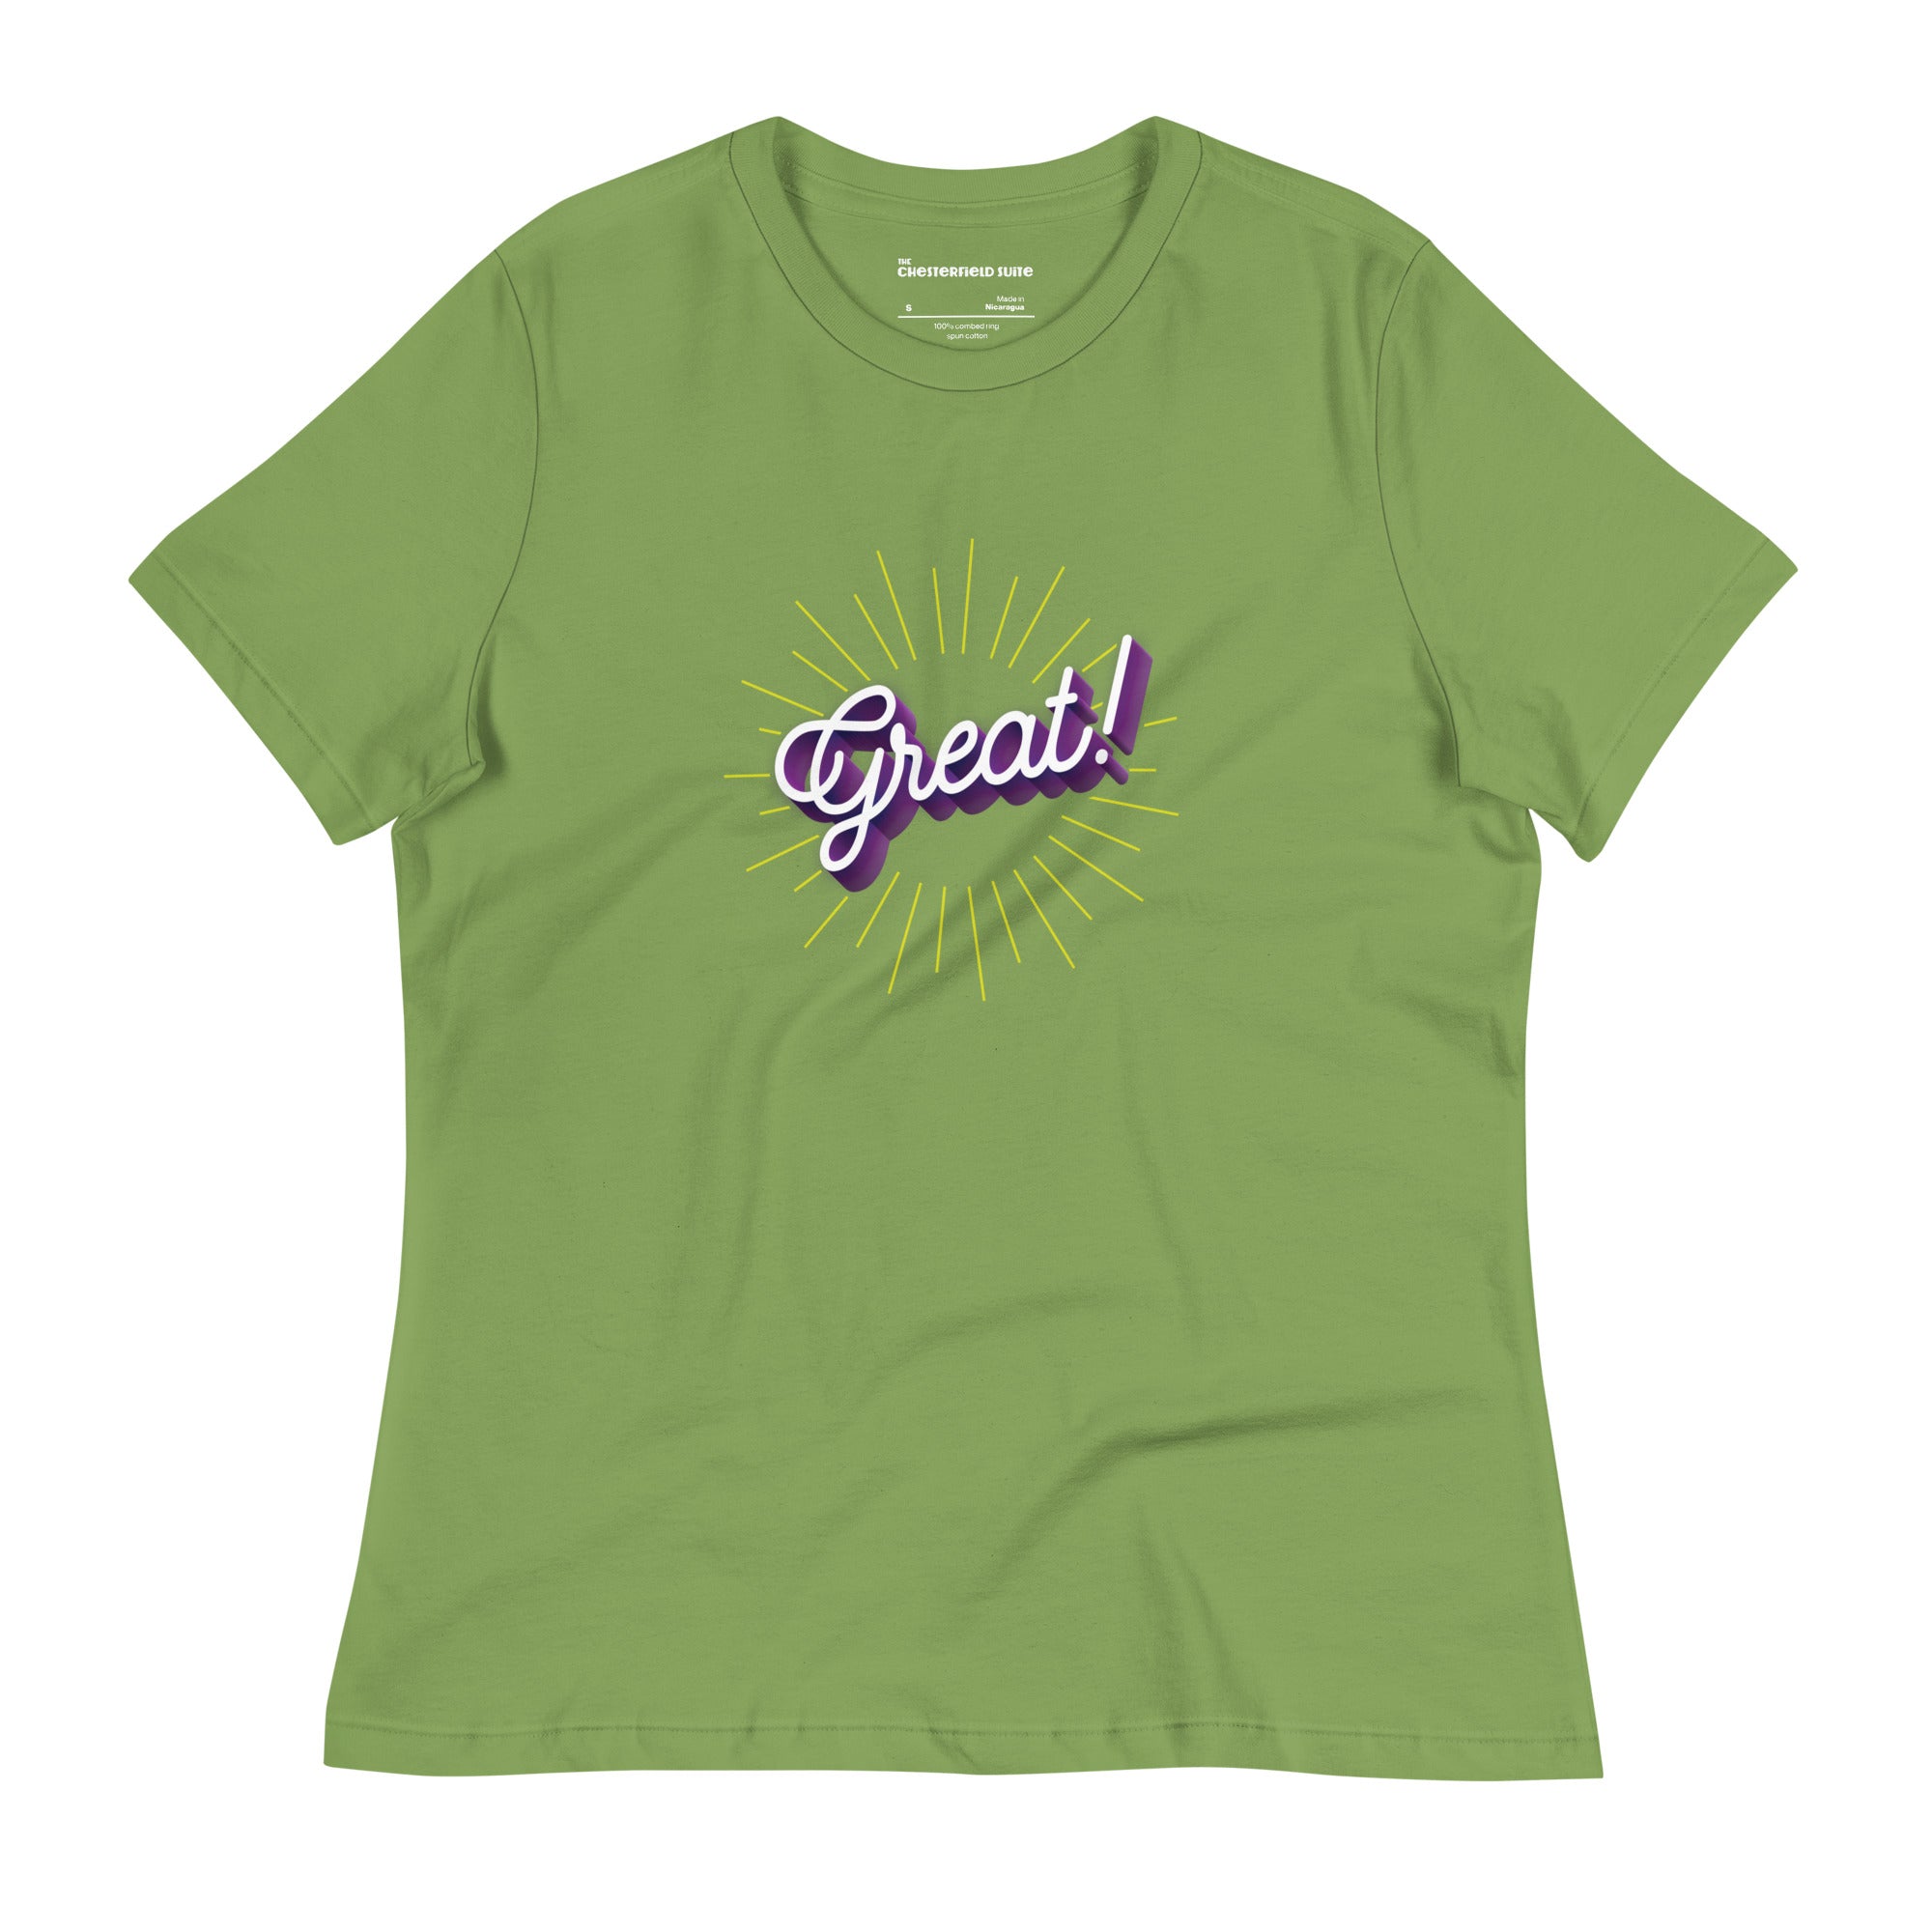 The word great! in cursive on green women's t-shirt